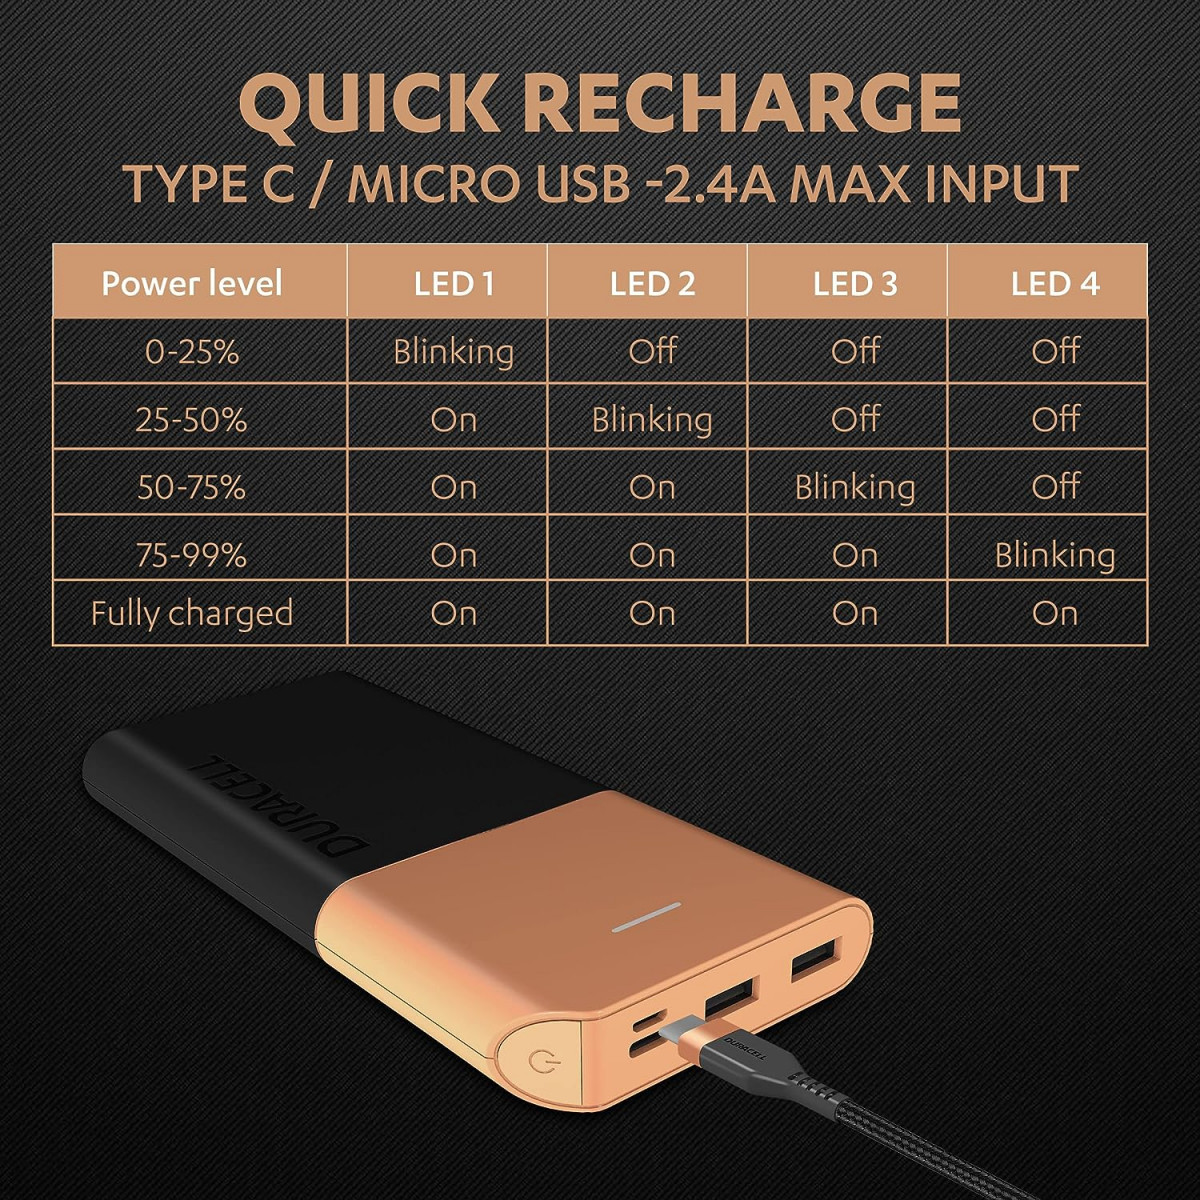 Duracell Power Bank 10000 mAh Portable Charger USB CMicro USB Input USB AUSB C Output Fast Charge Technology